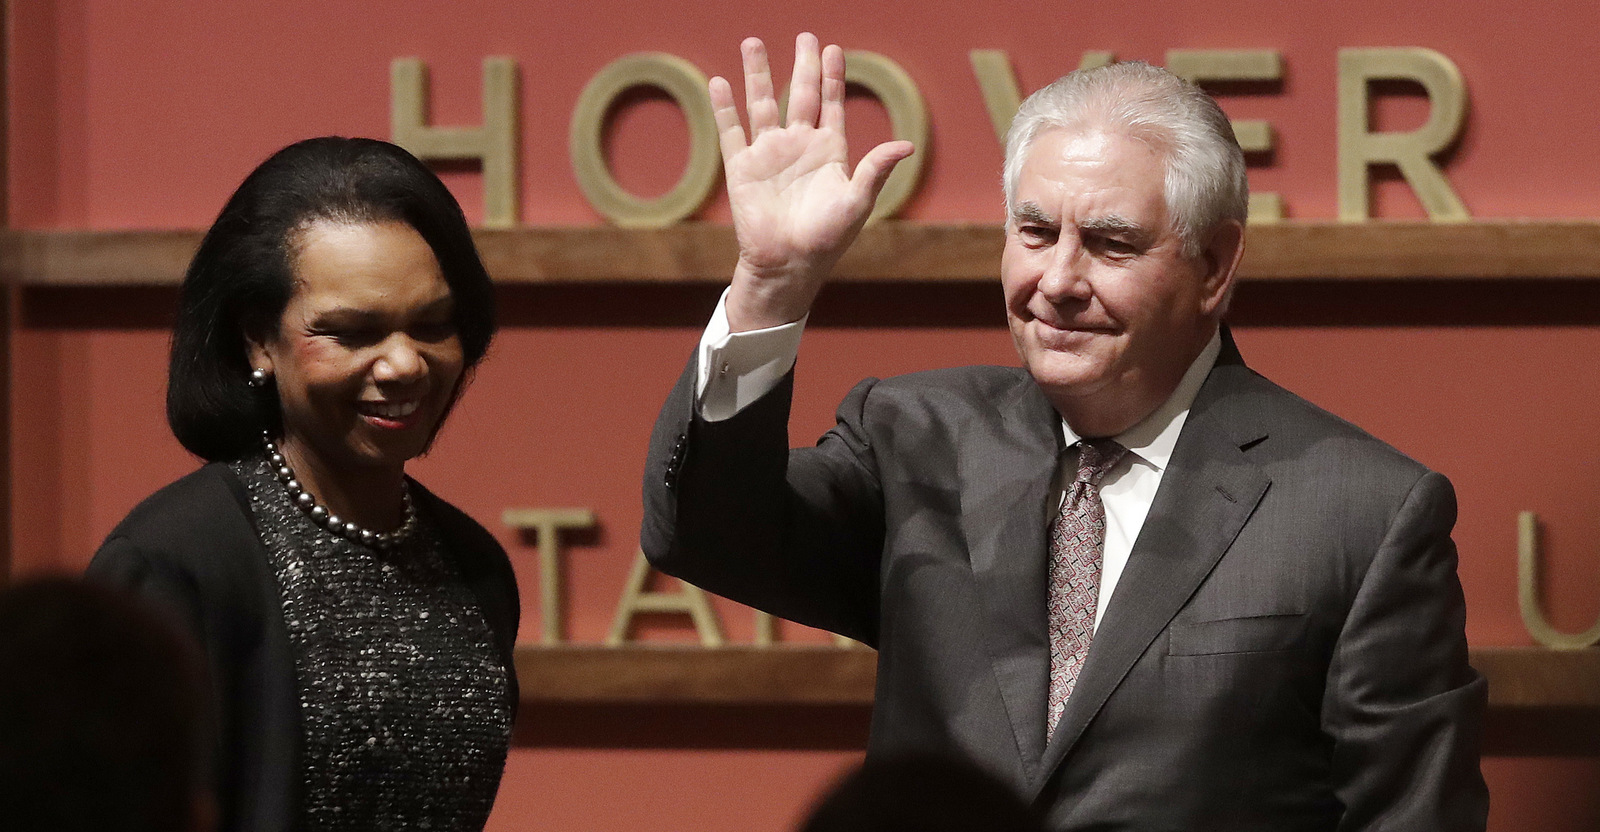 Secretary of State Rex Tillerson, right, waves after speaking to the Hoover Institution at Stanford University with former Secretary of State Condoleeza Rice, left, Jan. 17, 2018. Tillerson signaled the U.S. military will remain in Syria for the foreseeable future. (AP/Jeff Chiu)